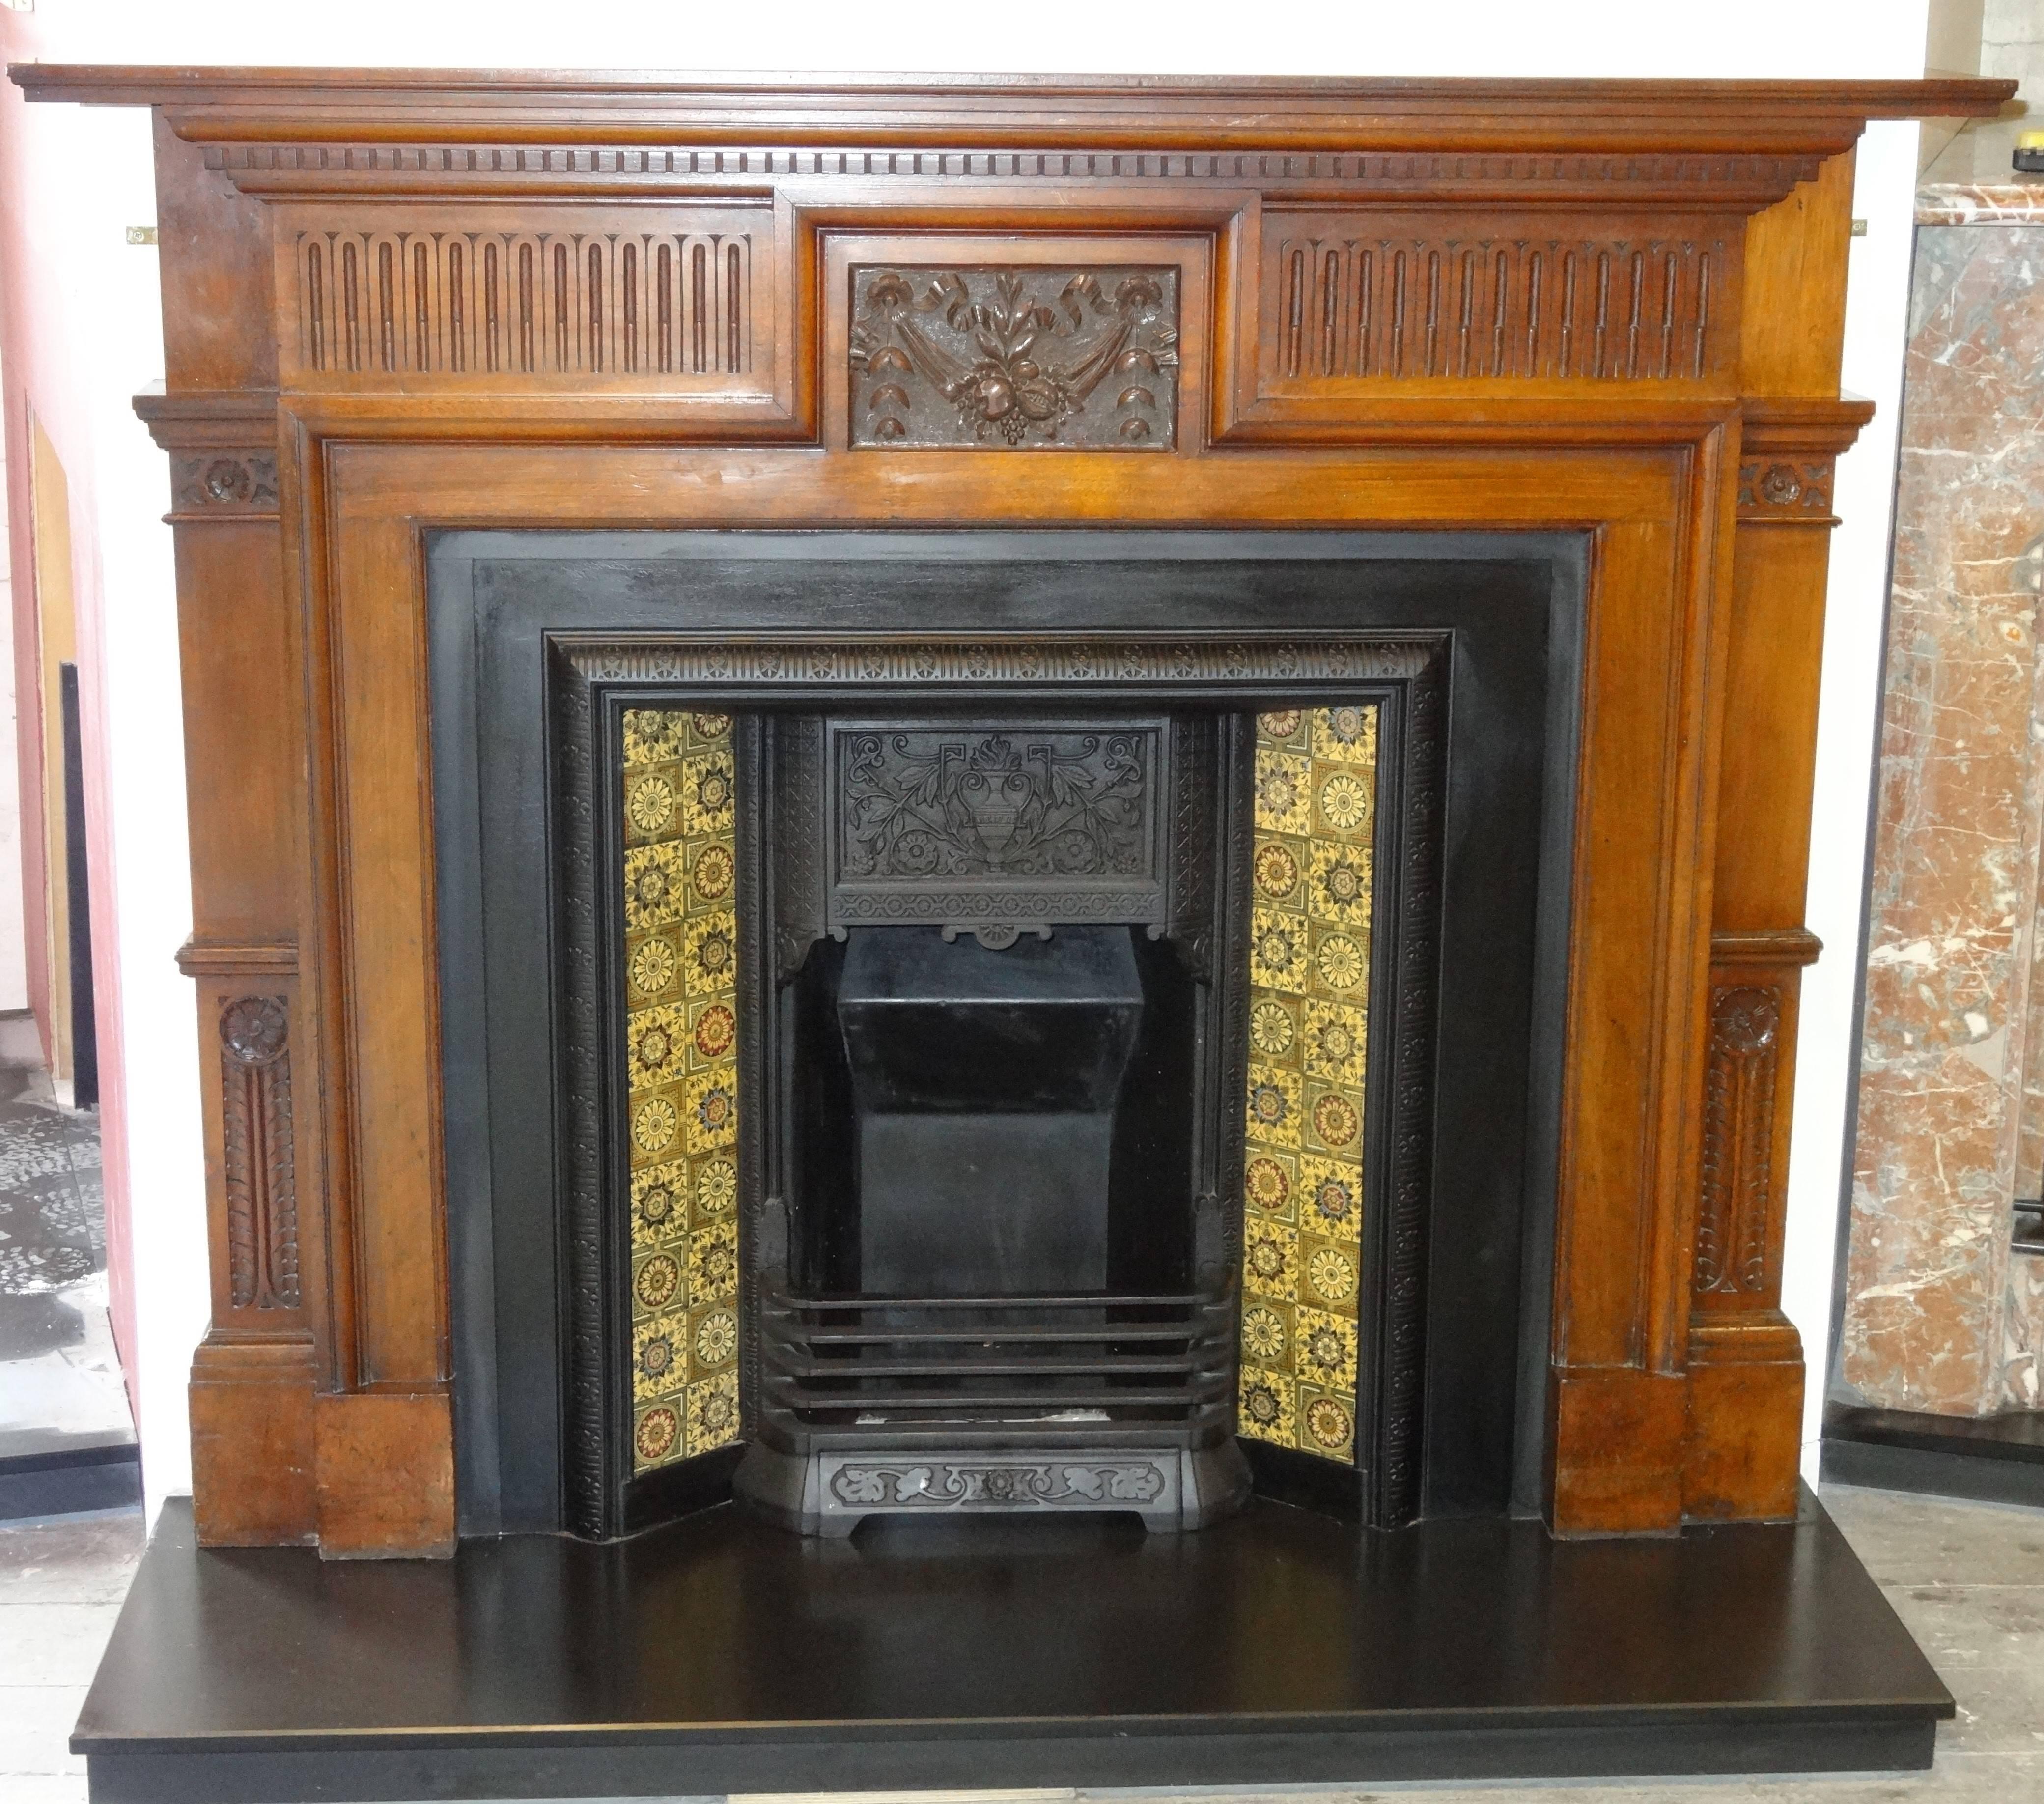 Antique Edwardian Hand Carved Walnut Fireplace Surround, reclaimed from an Edwardian property in County Antrim Northern Ireland. In original condition.
Slate Hearth and Cast Iron Insert sold separately.

Aperture Measurements:
Width 41